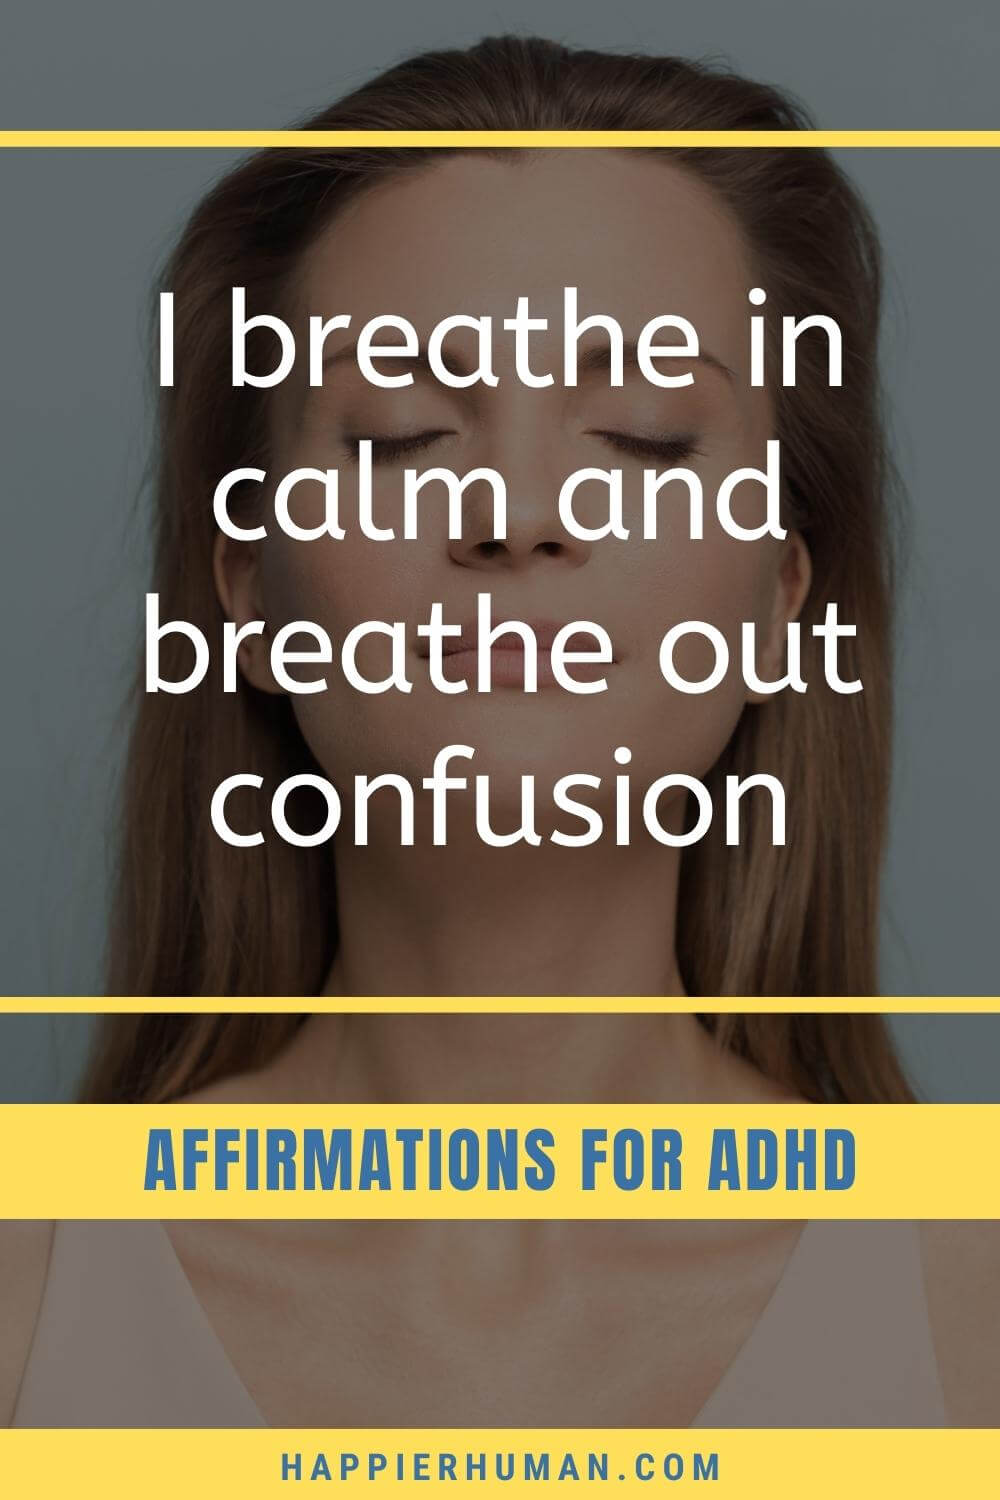 Affirmations For Adhd - I breathe in calm and breathe out confusion | affirmations for anxiety | affirmations for self love | affirmations for focus